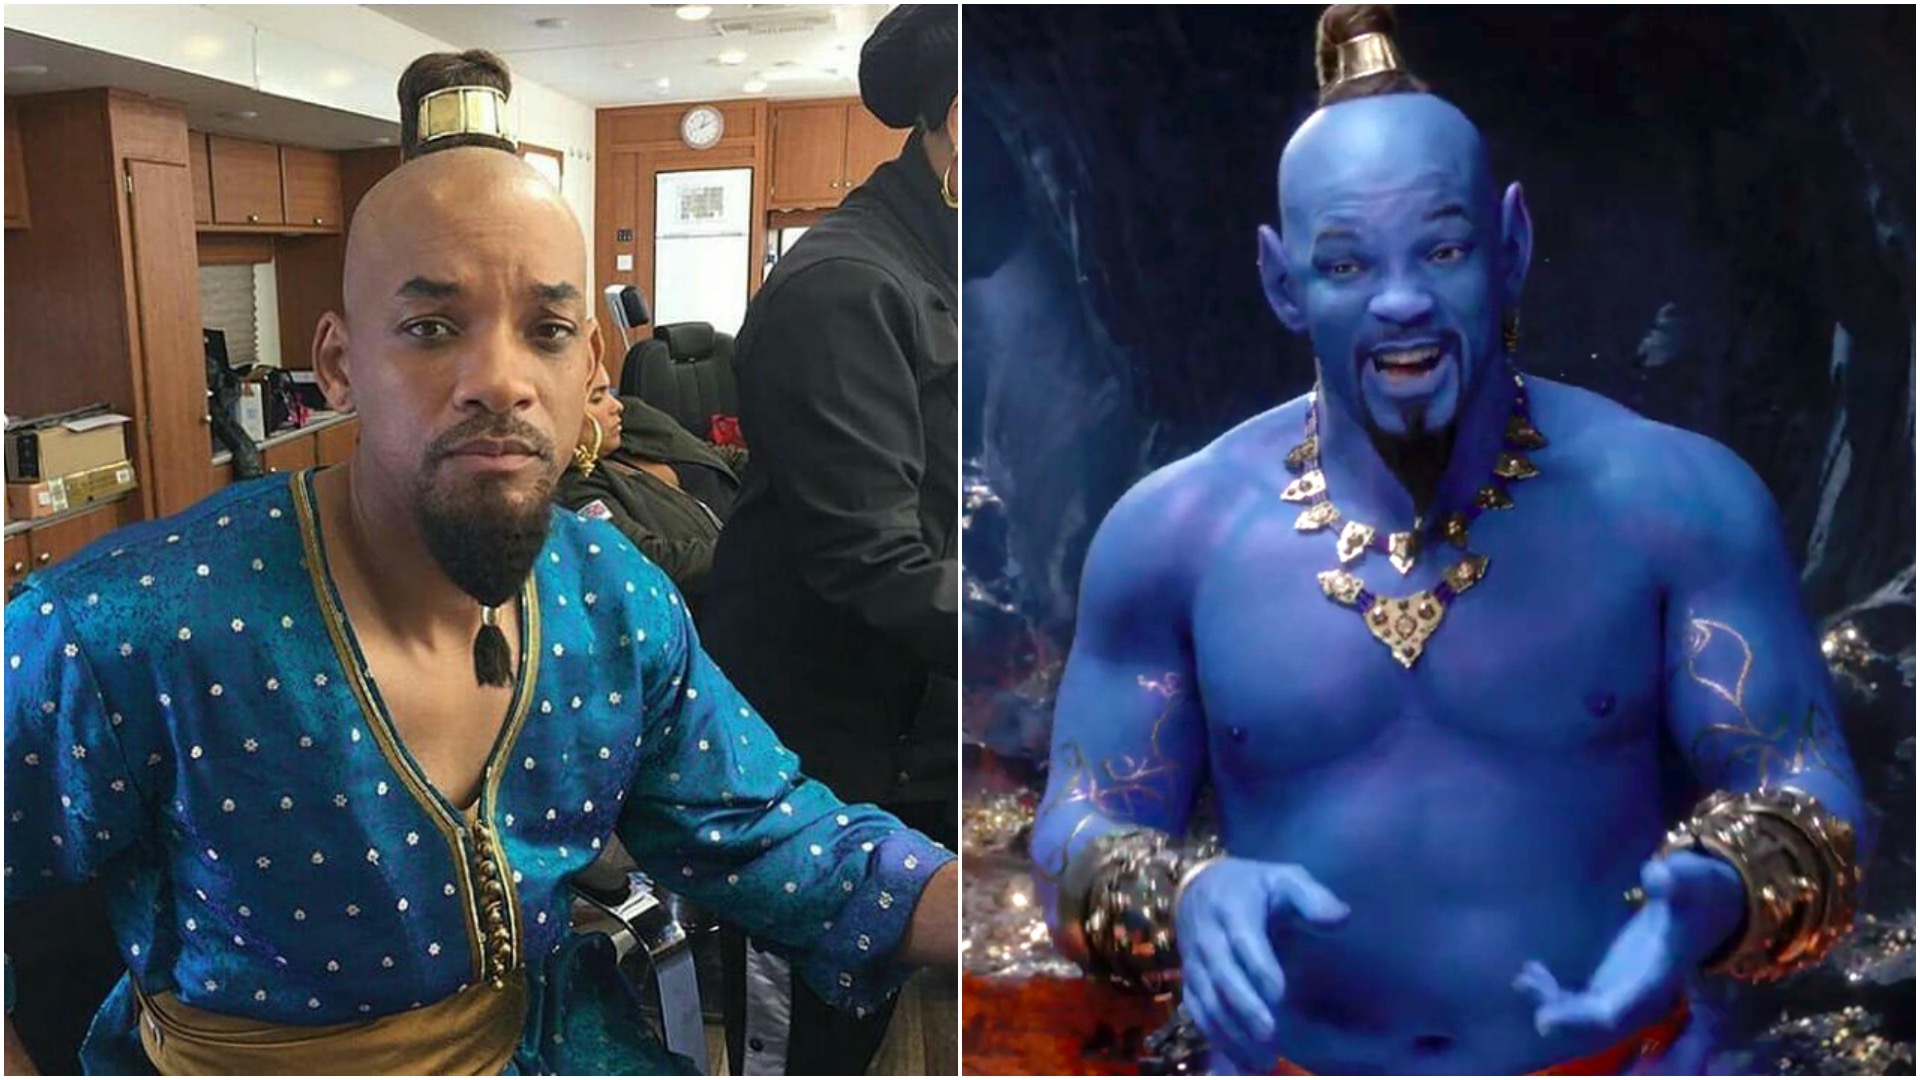 New Live-Action Aladdin Trailer Reveals Blue Will Smith Genie. This is Real. | Geek ...